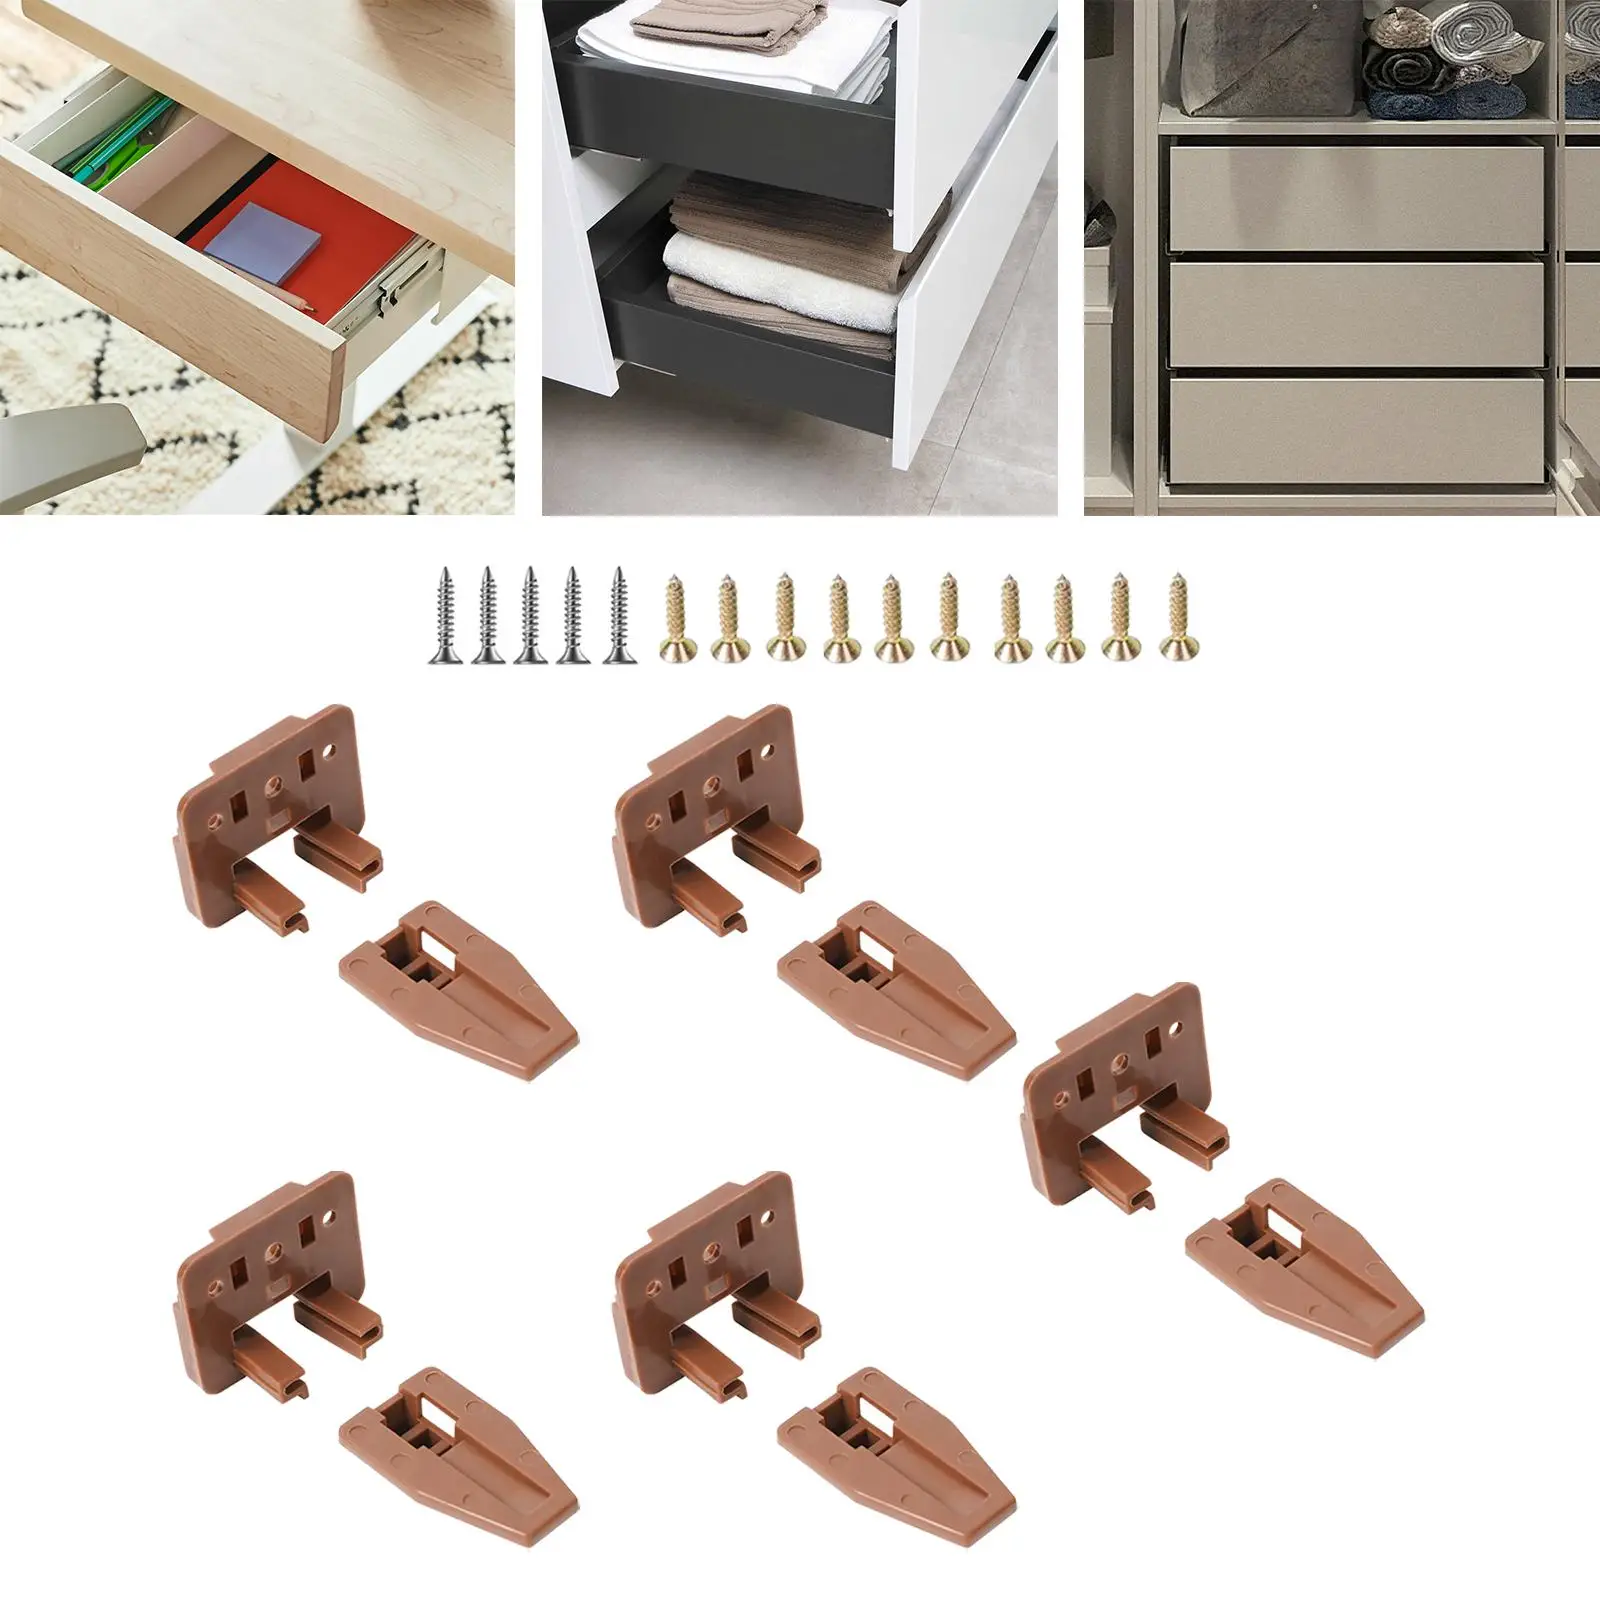 5 Pieces Drawer Slides Track Guide with Nails Mount Pp,Brown Drawer Replacement Part for NightStand Center Mount Drawer